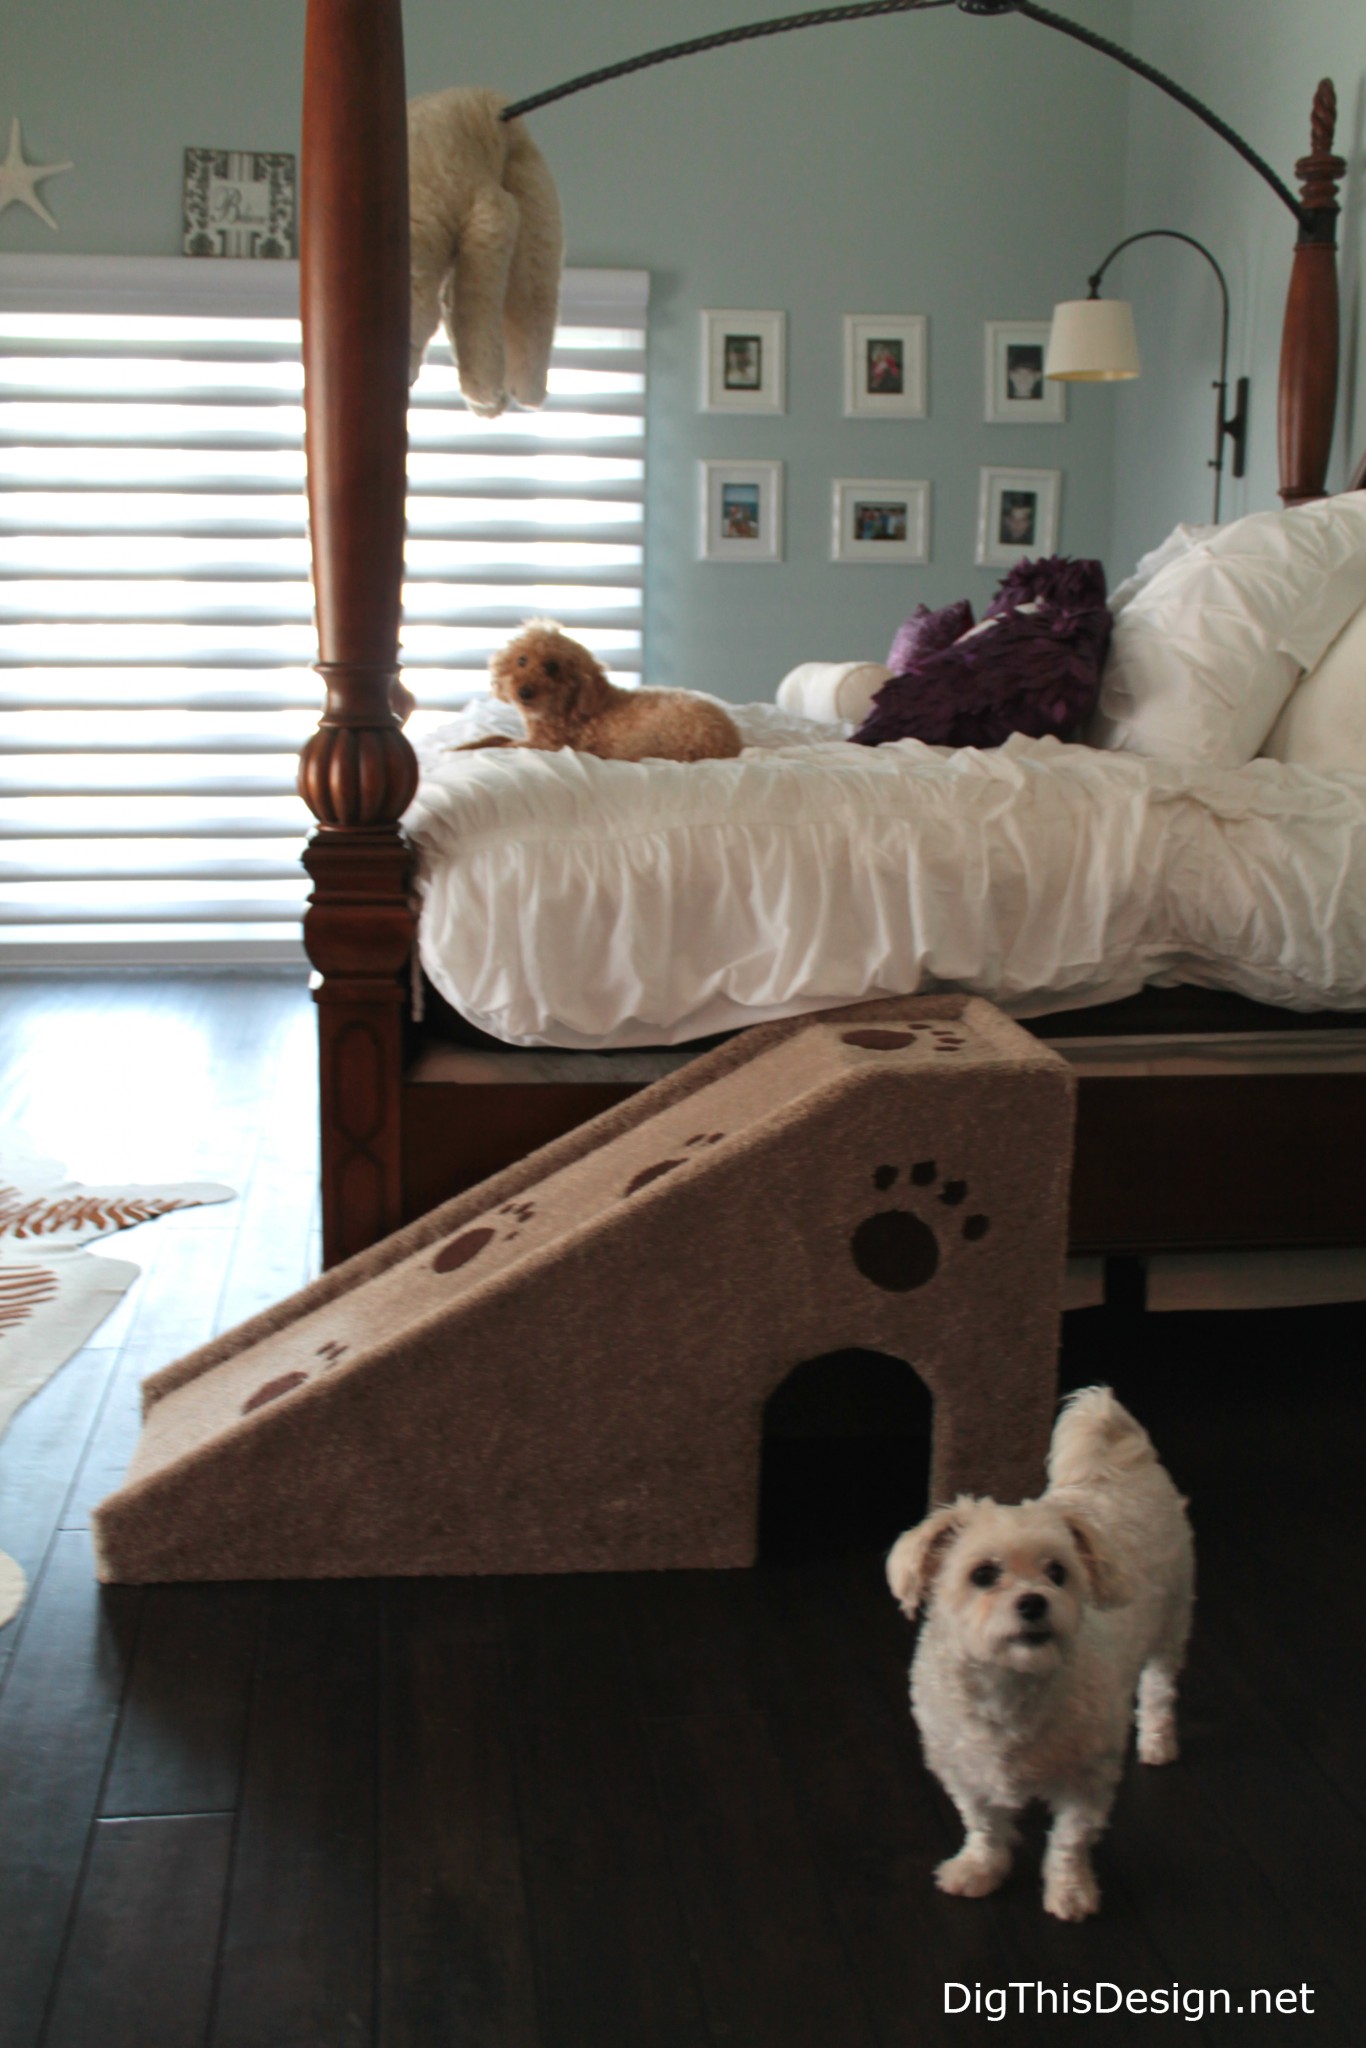 Room Décor That Intergrates Your Dogs Comforts; 10 Dog Bed Design Ideas